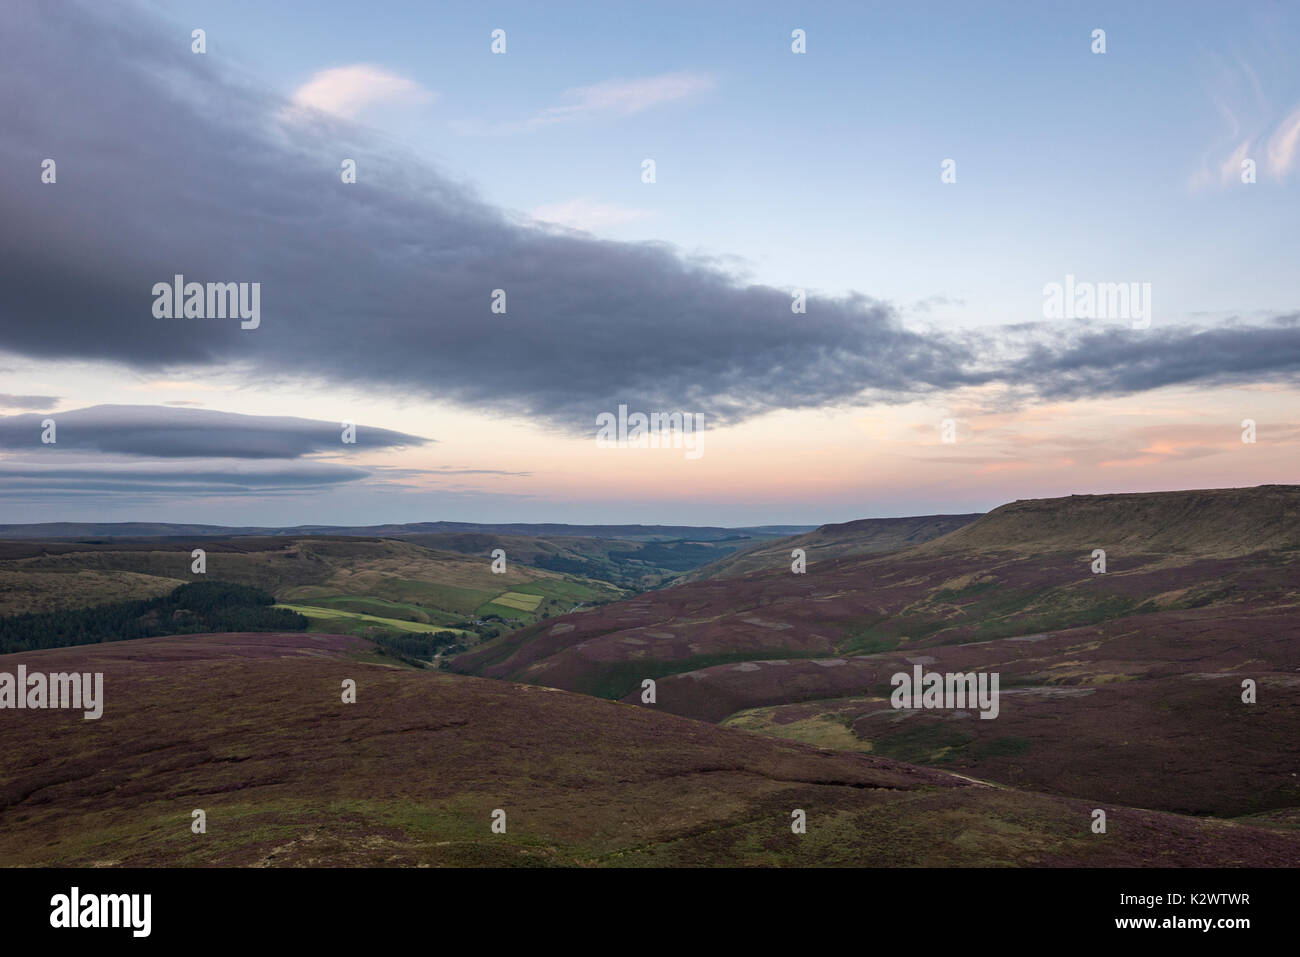 Dusk at Fairbrook Naze in the Peak District, Derbyshire, England. Overlooking the hills beside Snake Pass on summer evening. Stock Photo